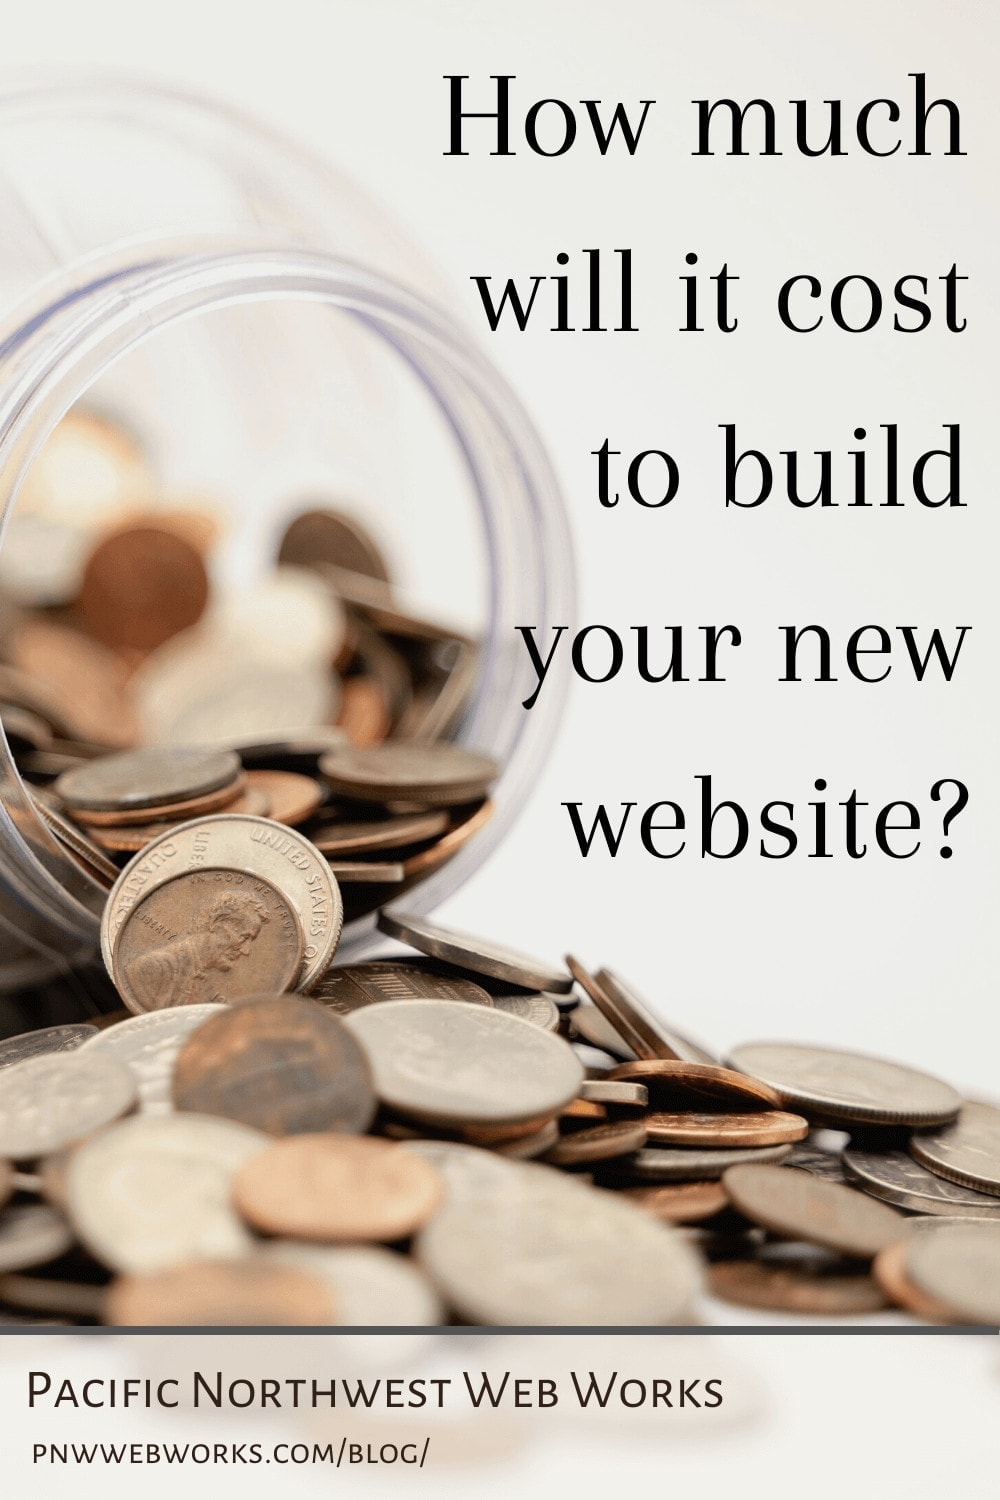 How much will your new website cost